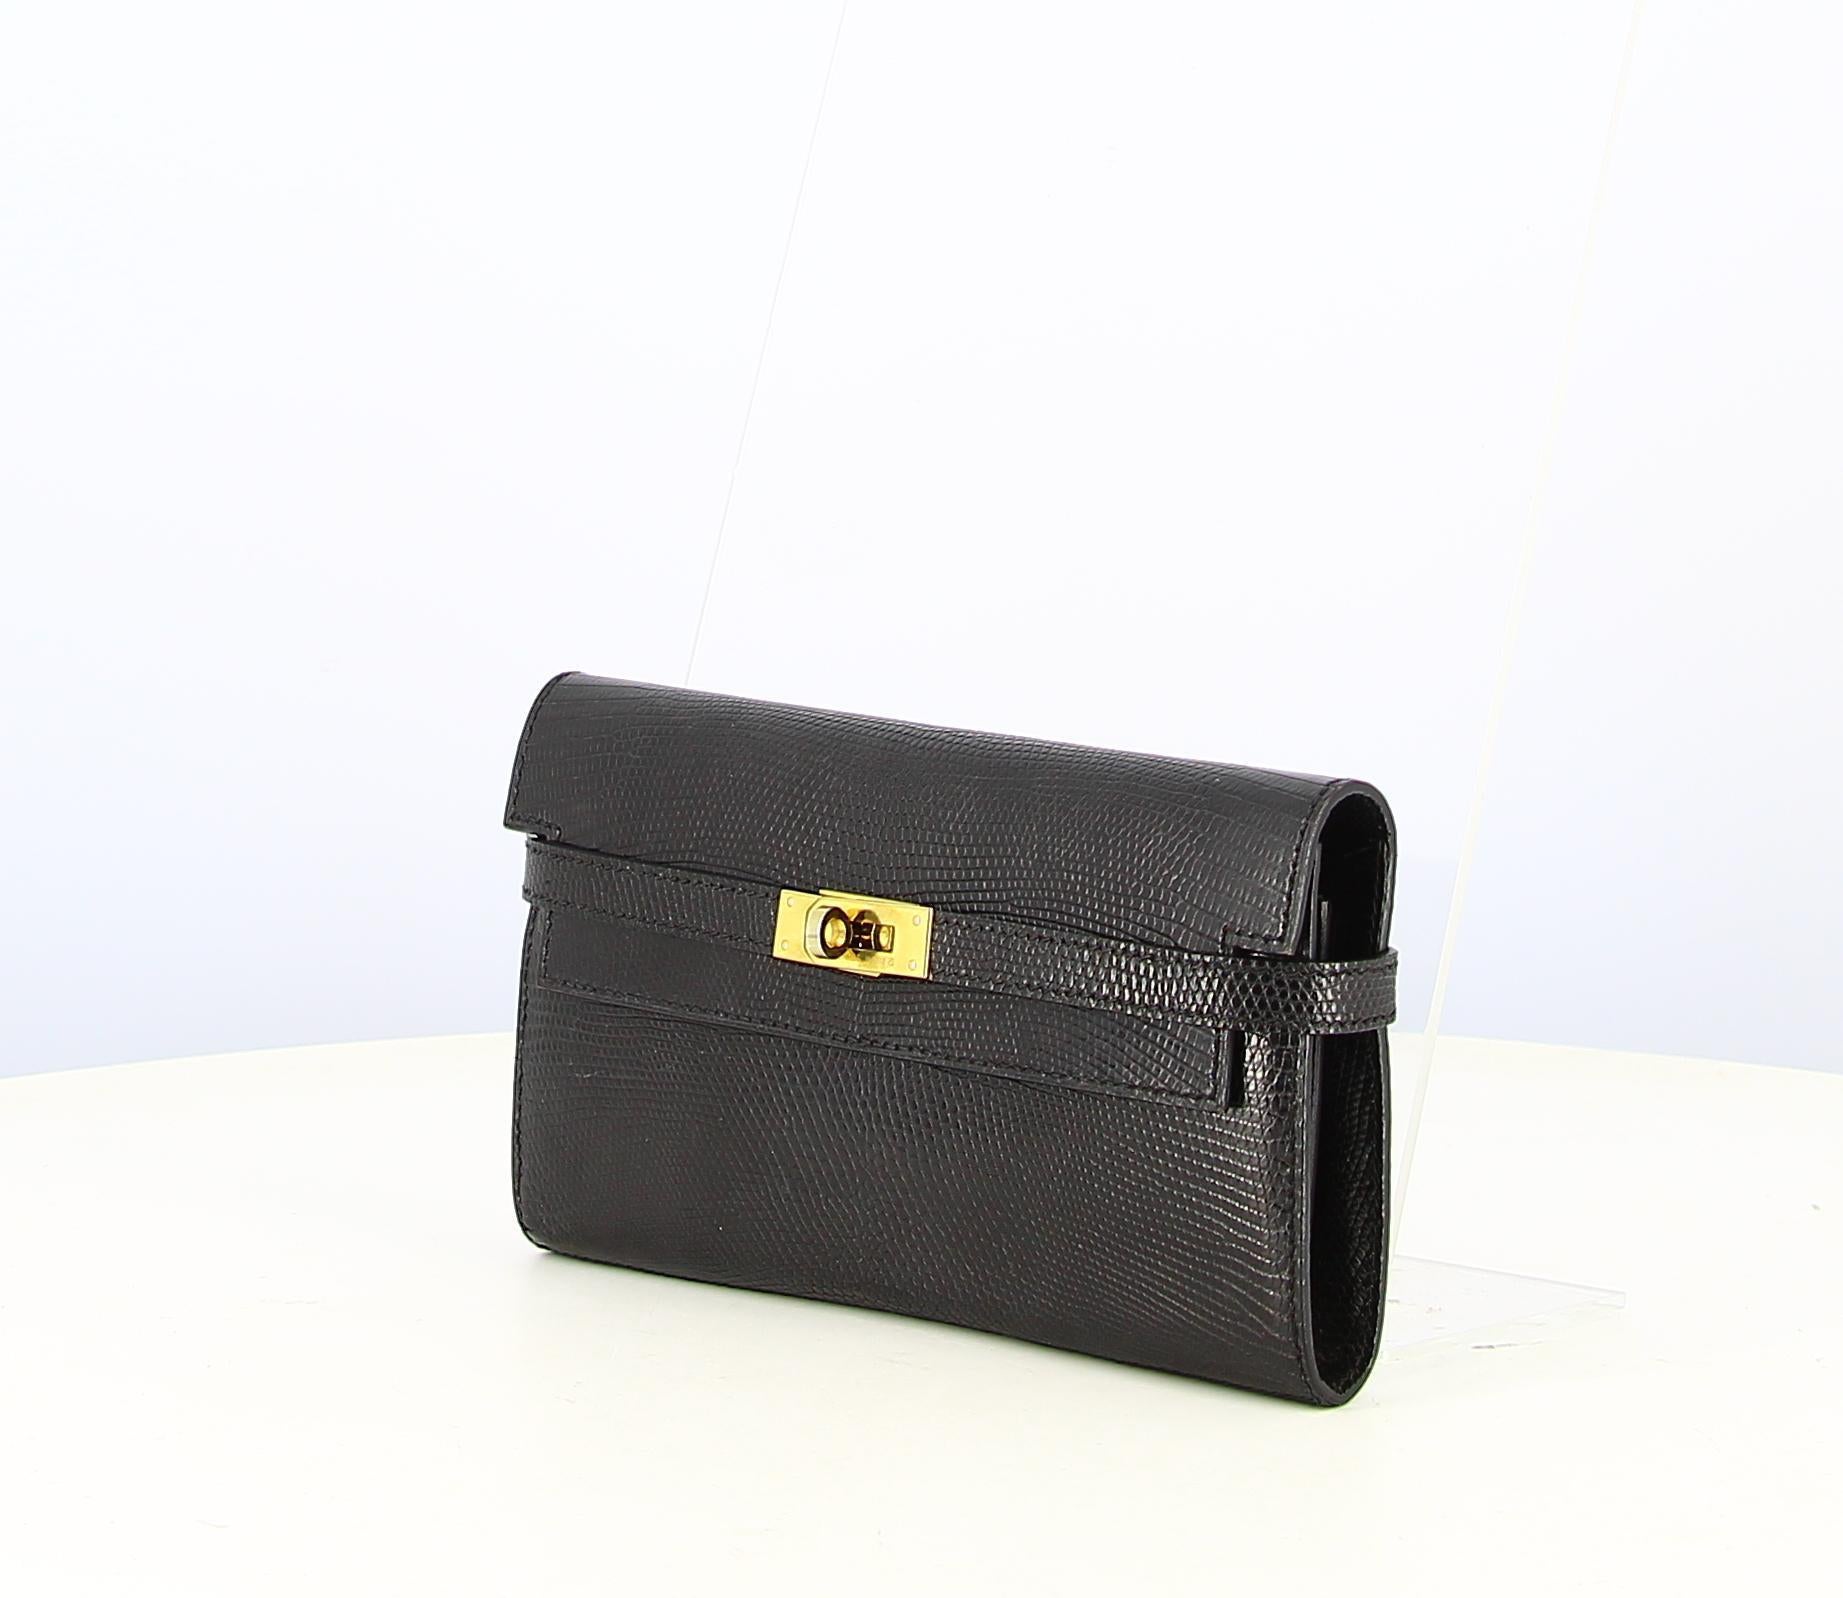 Kelly Hermes Black Lizard Wallet
- Good condition, shows slight wear and tear over time
- Hermes Kelly wallet, black lizard, golden clasp
- The interior is in black grained leather, three parts, one of which is zipped golden, plus small pockets